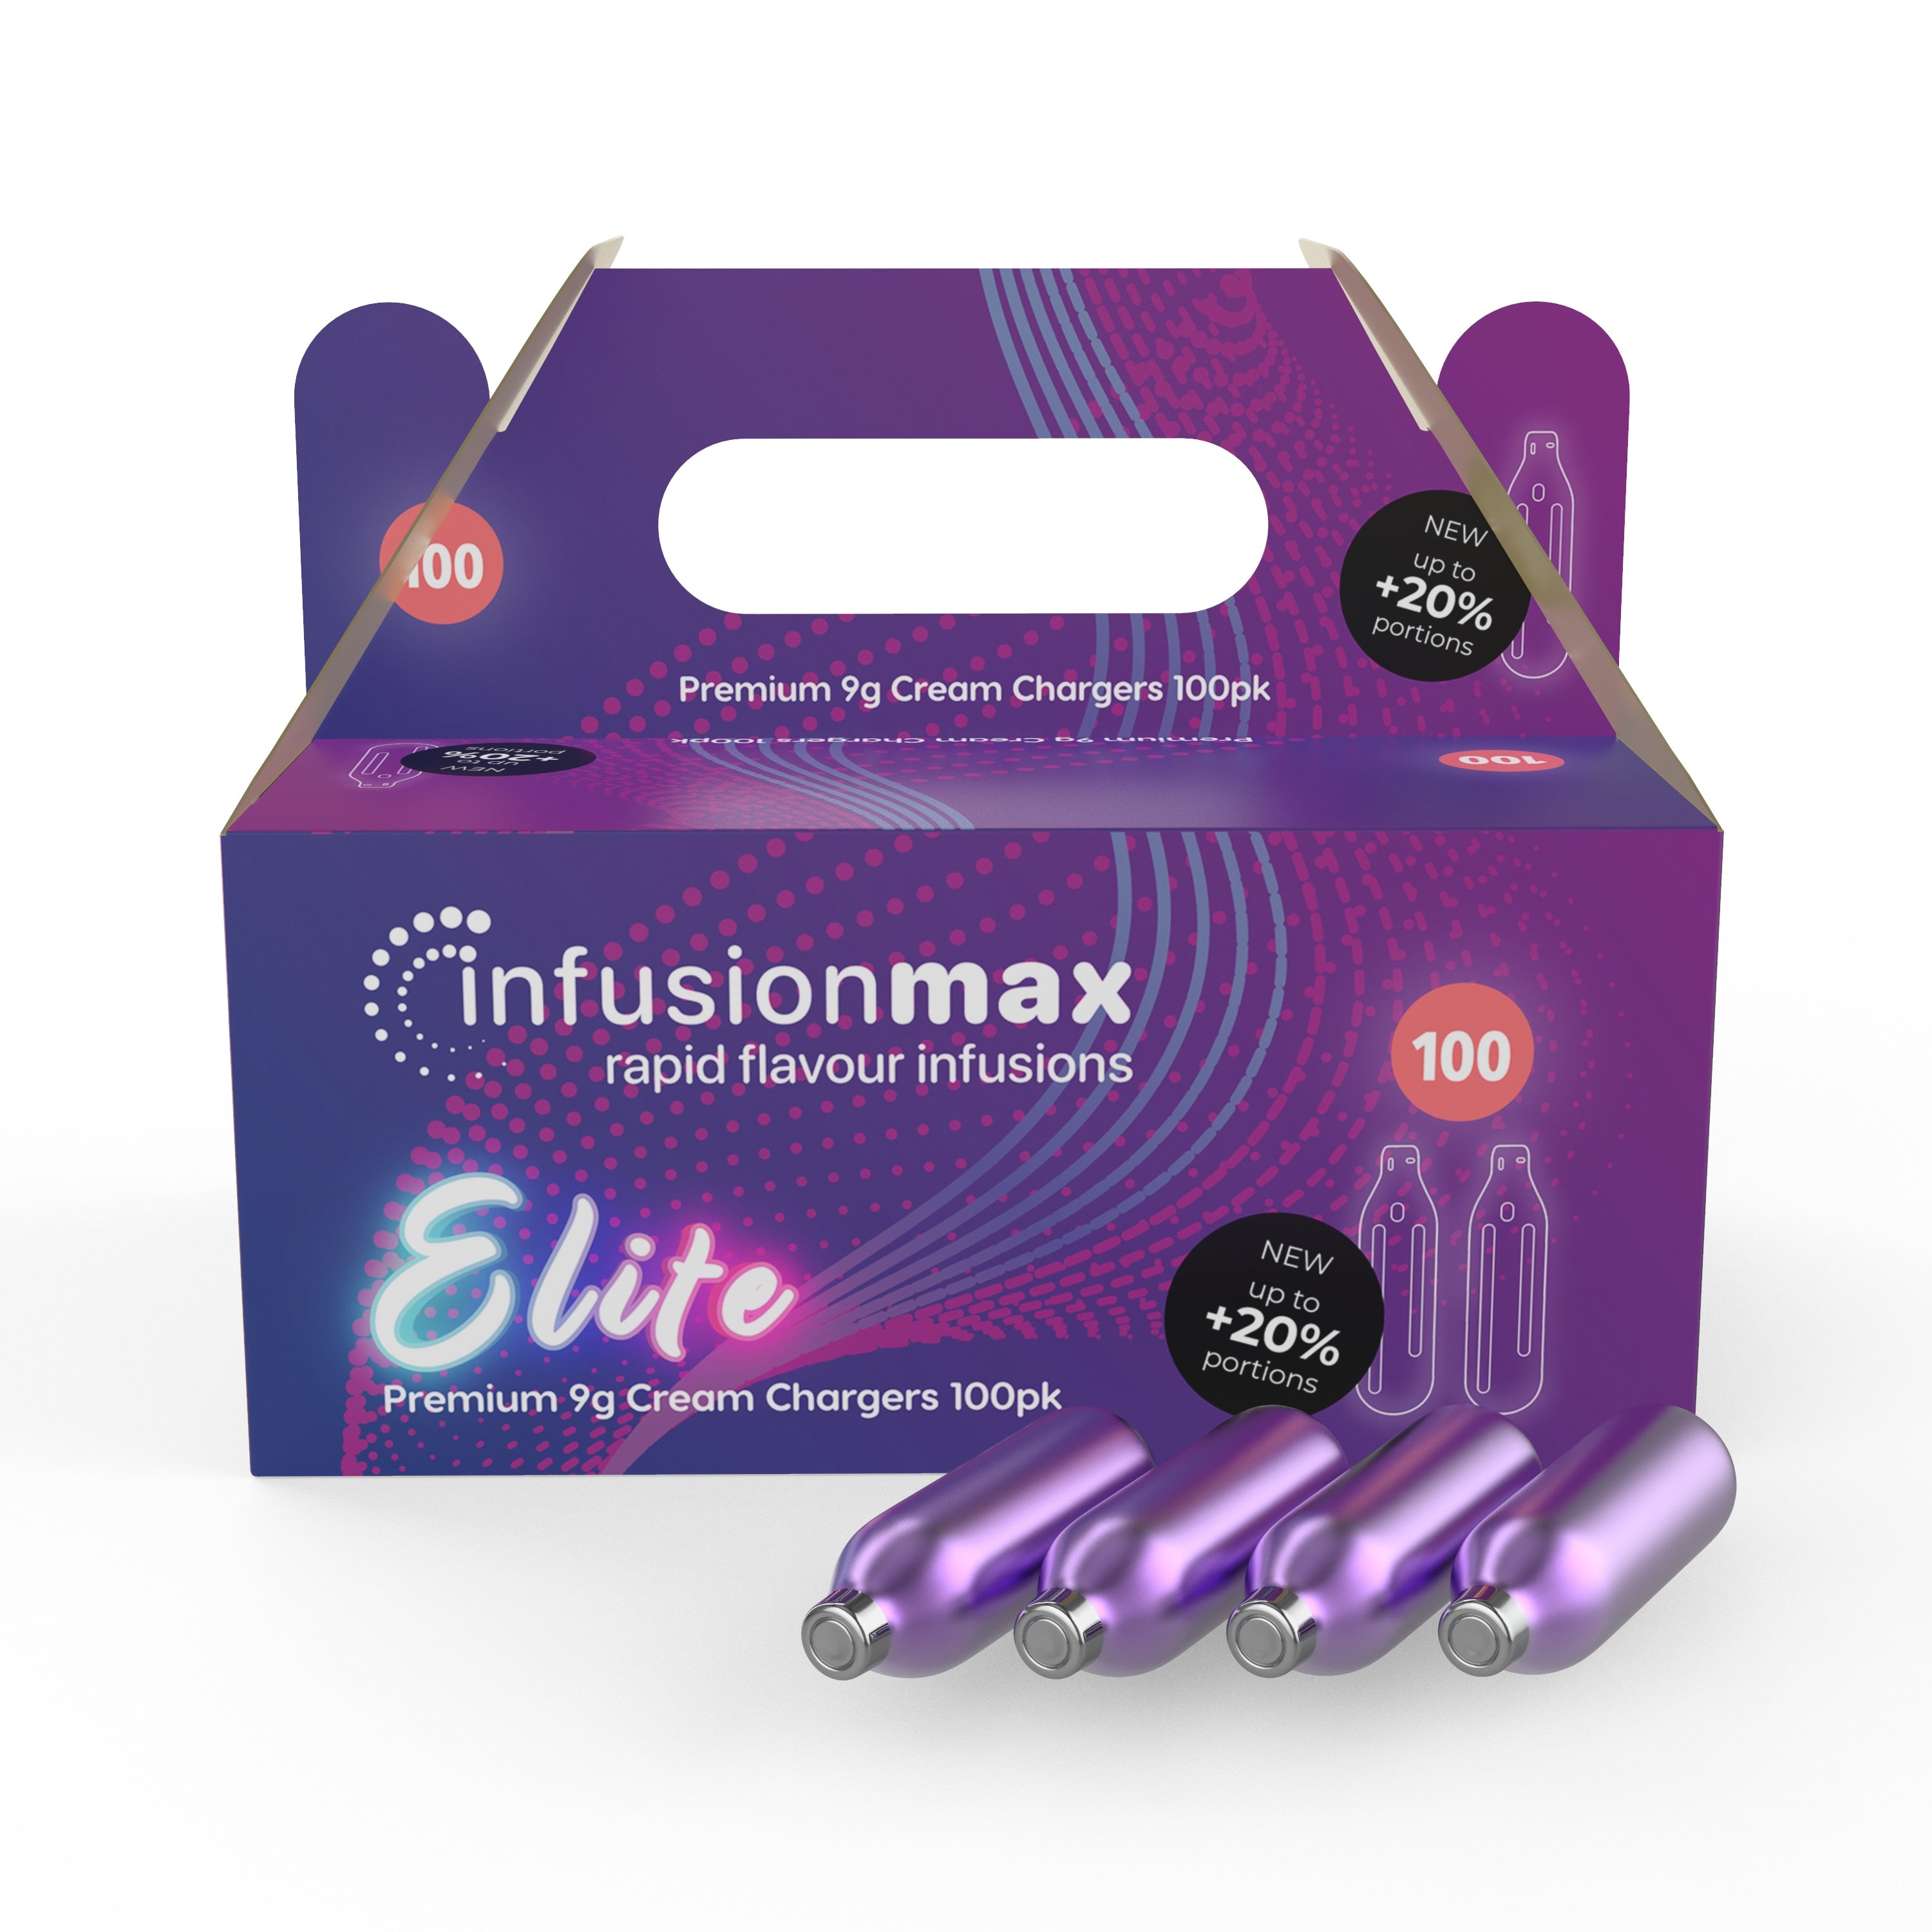 *NEW 2022* InfusionMax Elite 9g Cream Chargers - 100pks WHOLESALE